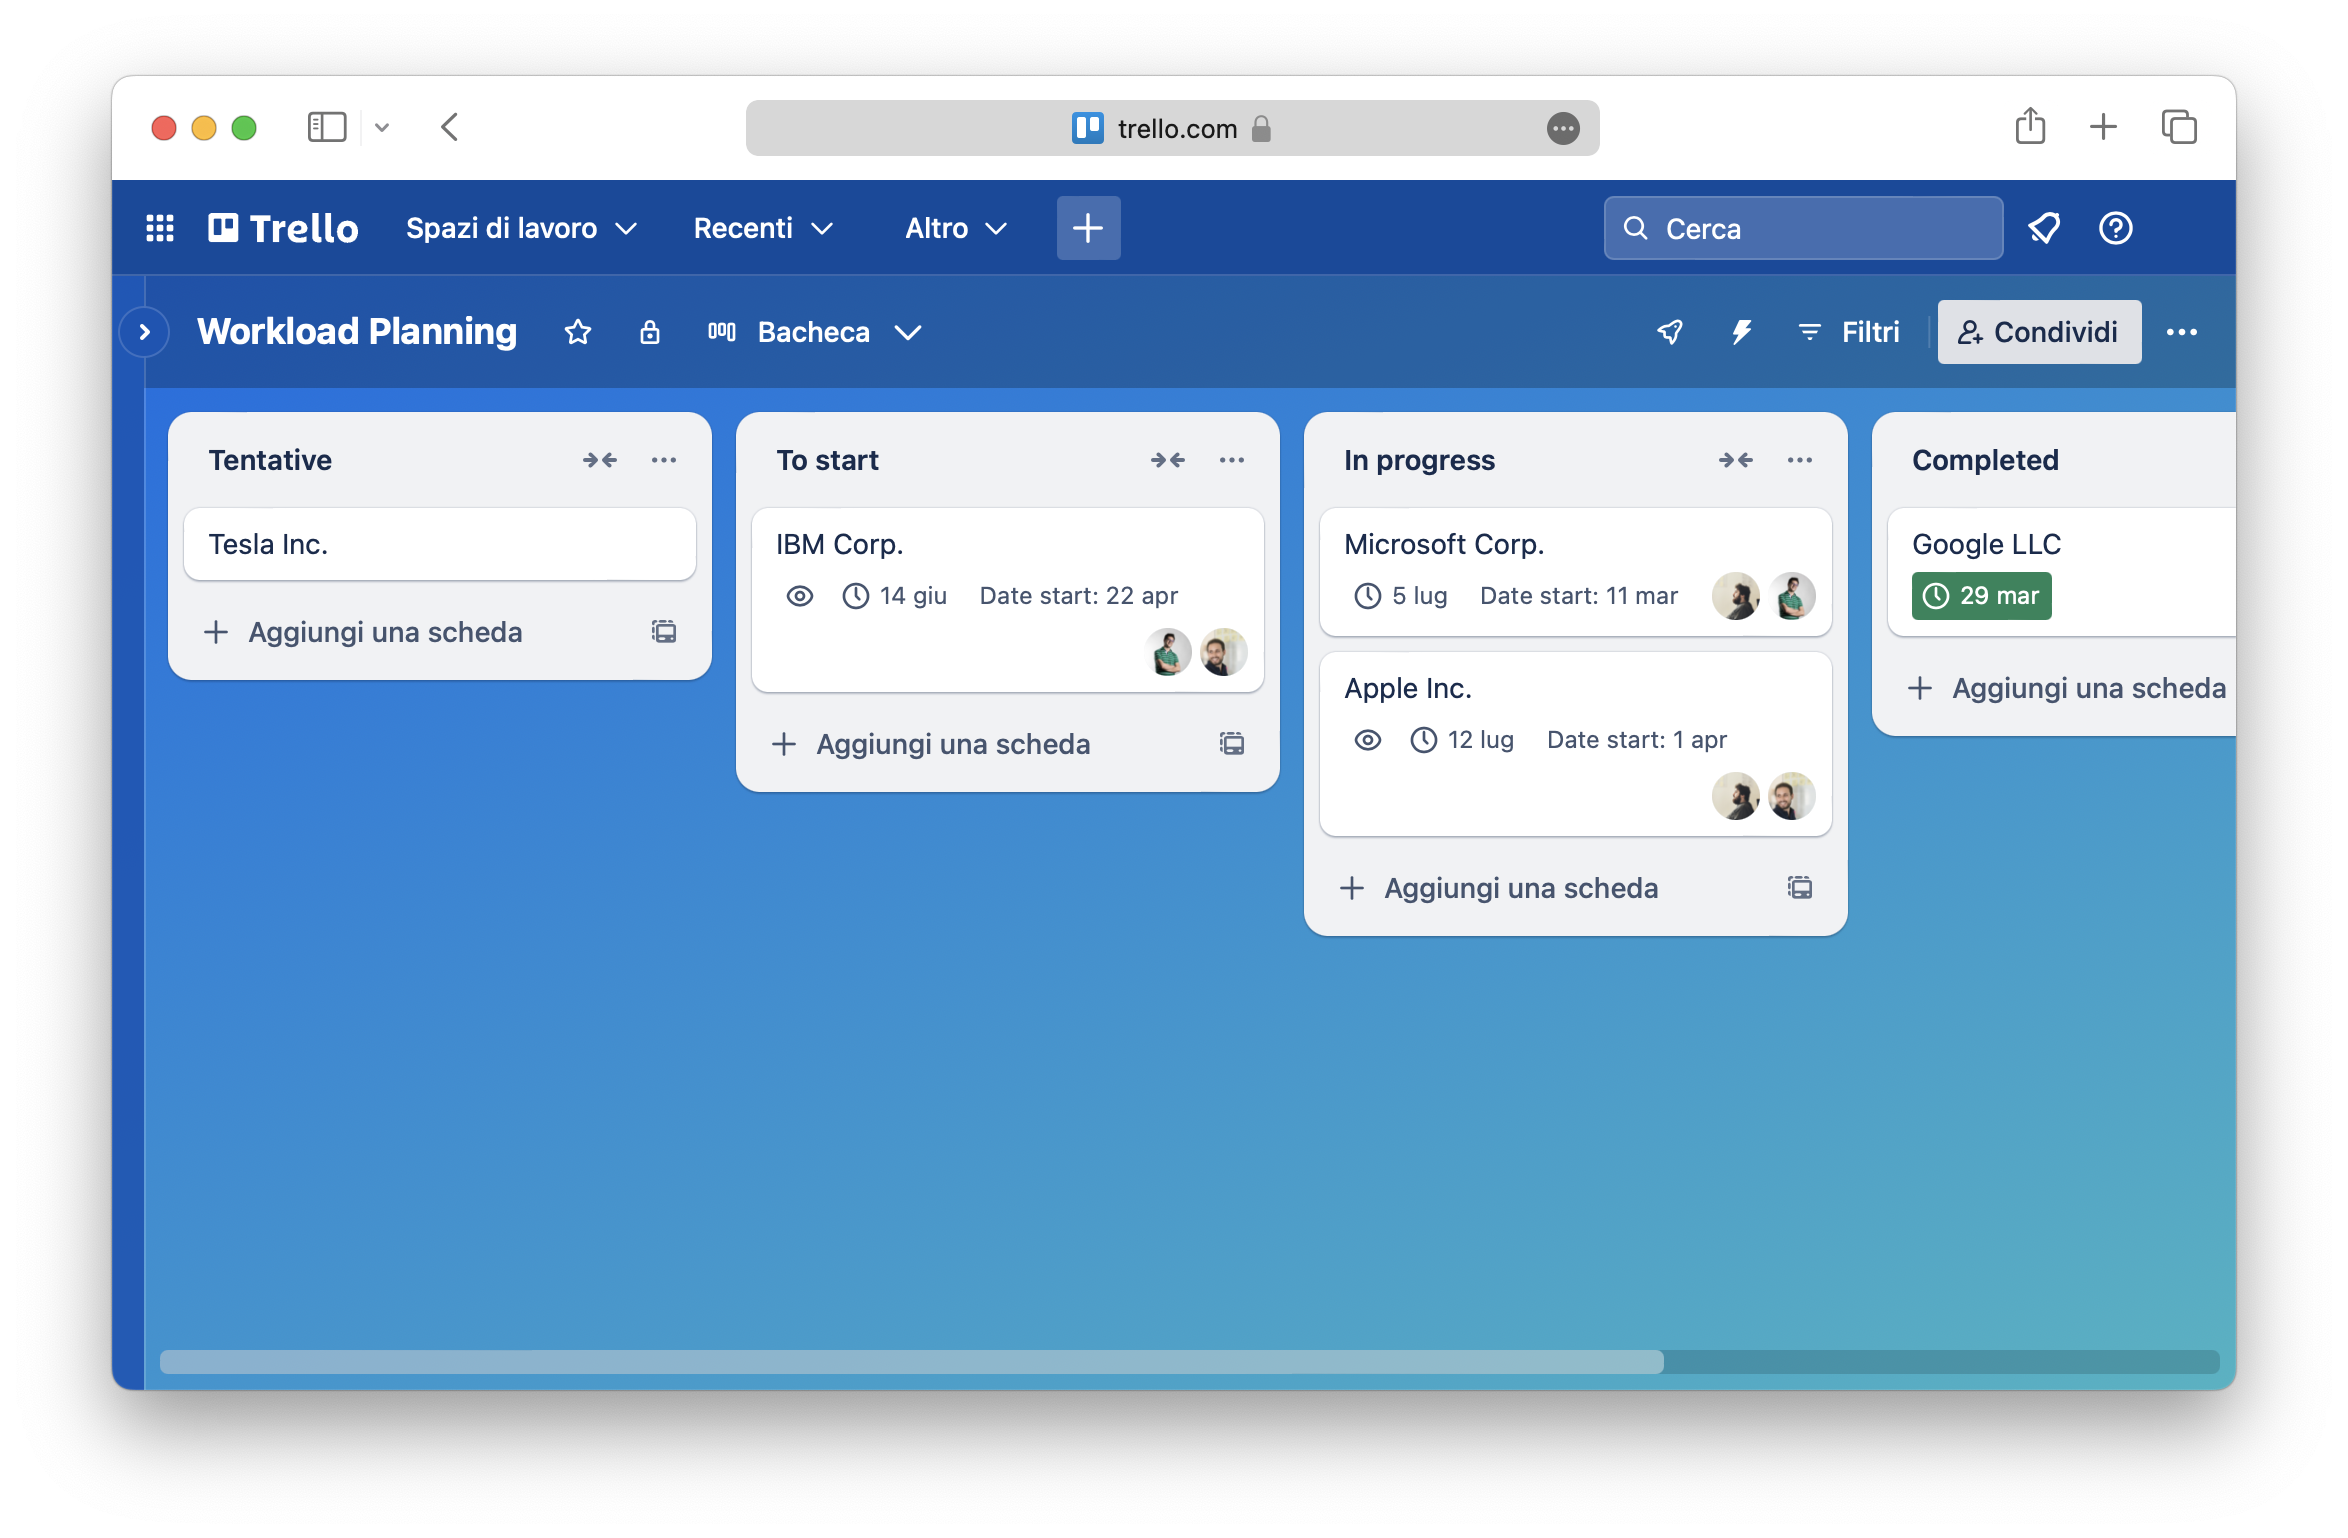 Using Trello for workload planning